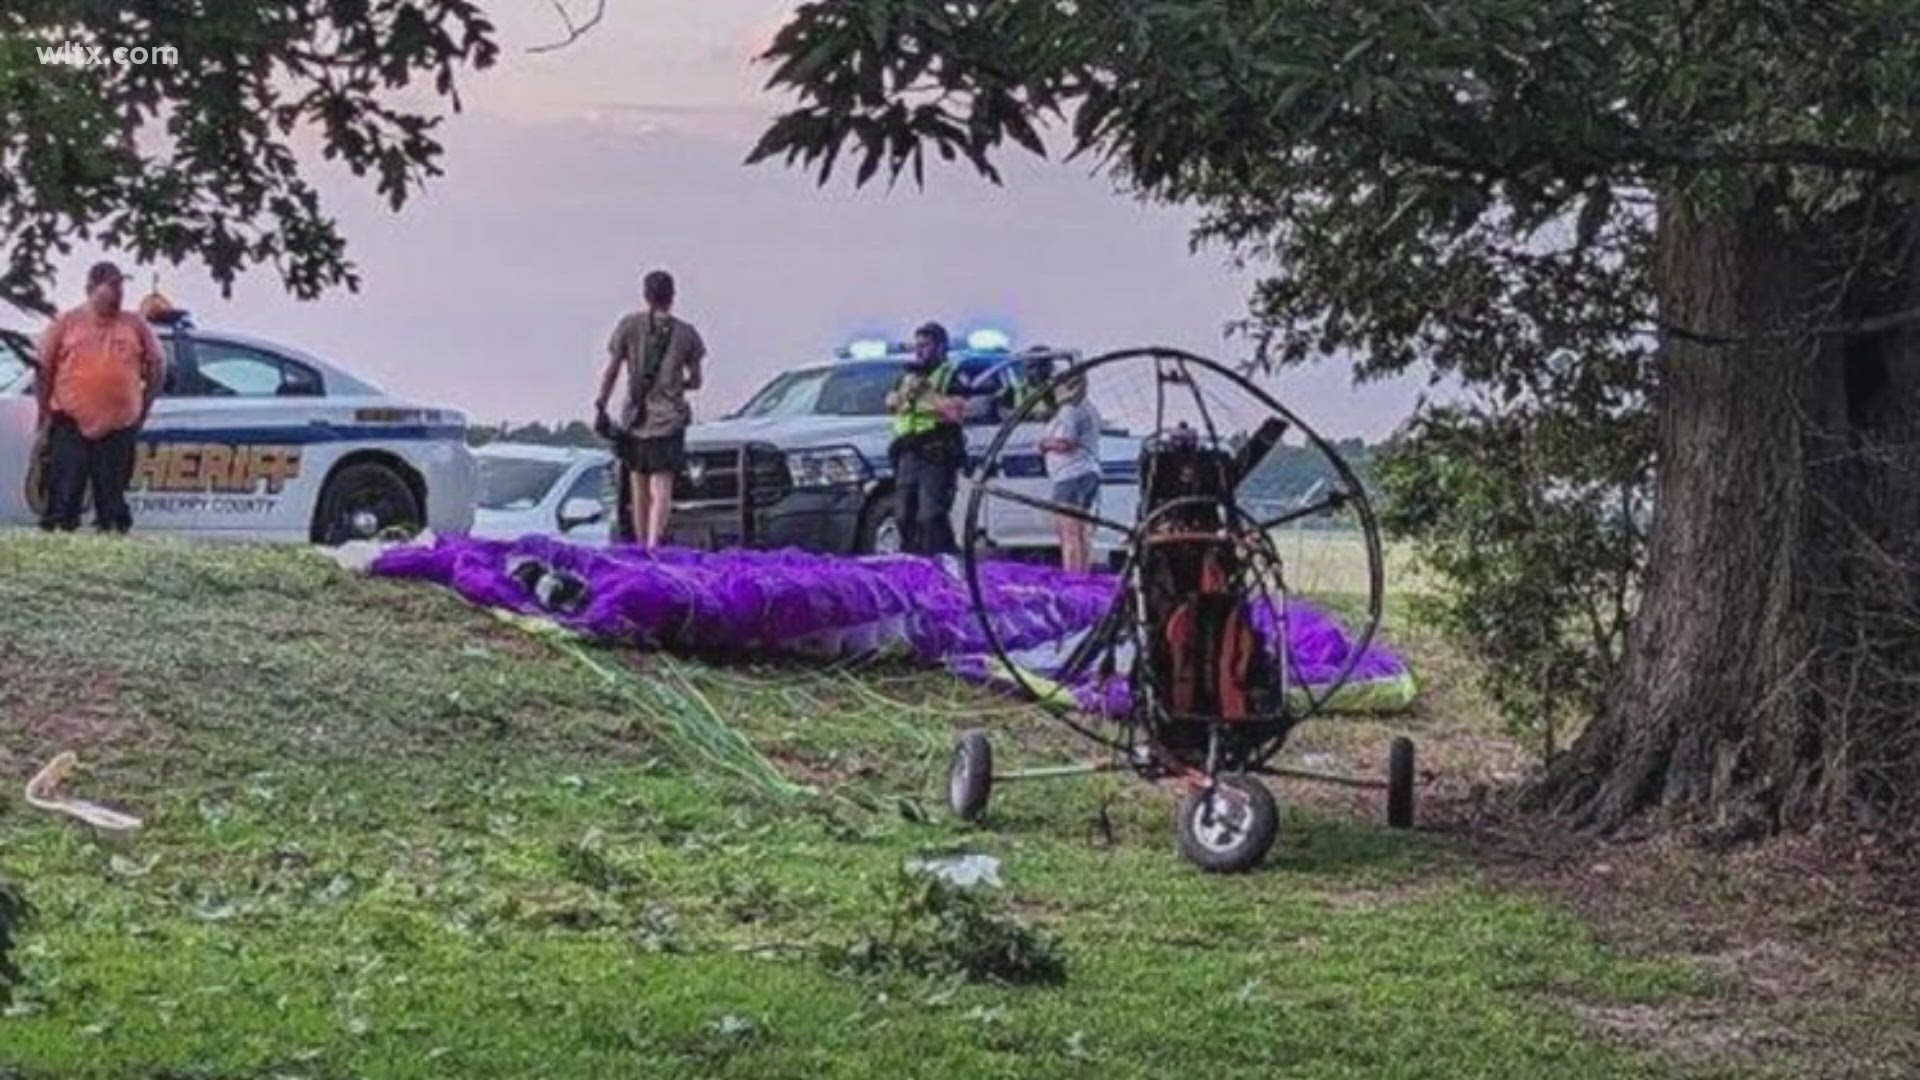 Authorities say an ultralight aircraft crash in Newberry County led to a passenger being airlifted to an area hospital on Saturday evening.